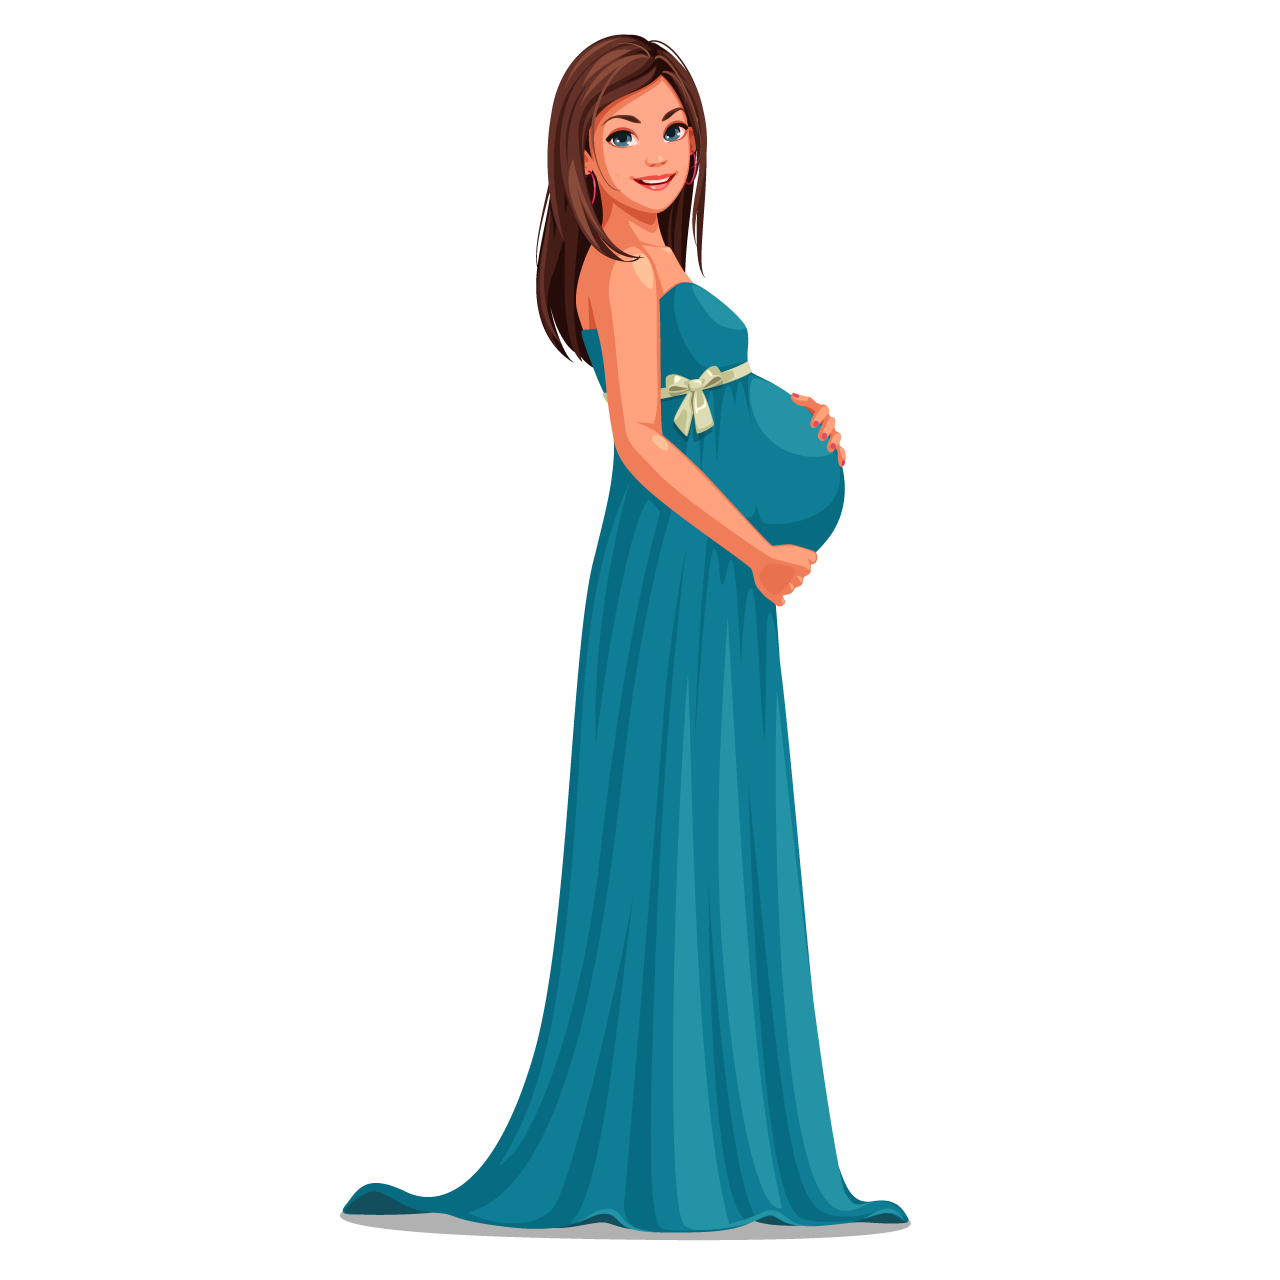 Pregnant-woman-wearing-long-blue-dress-holding-her-belly.png